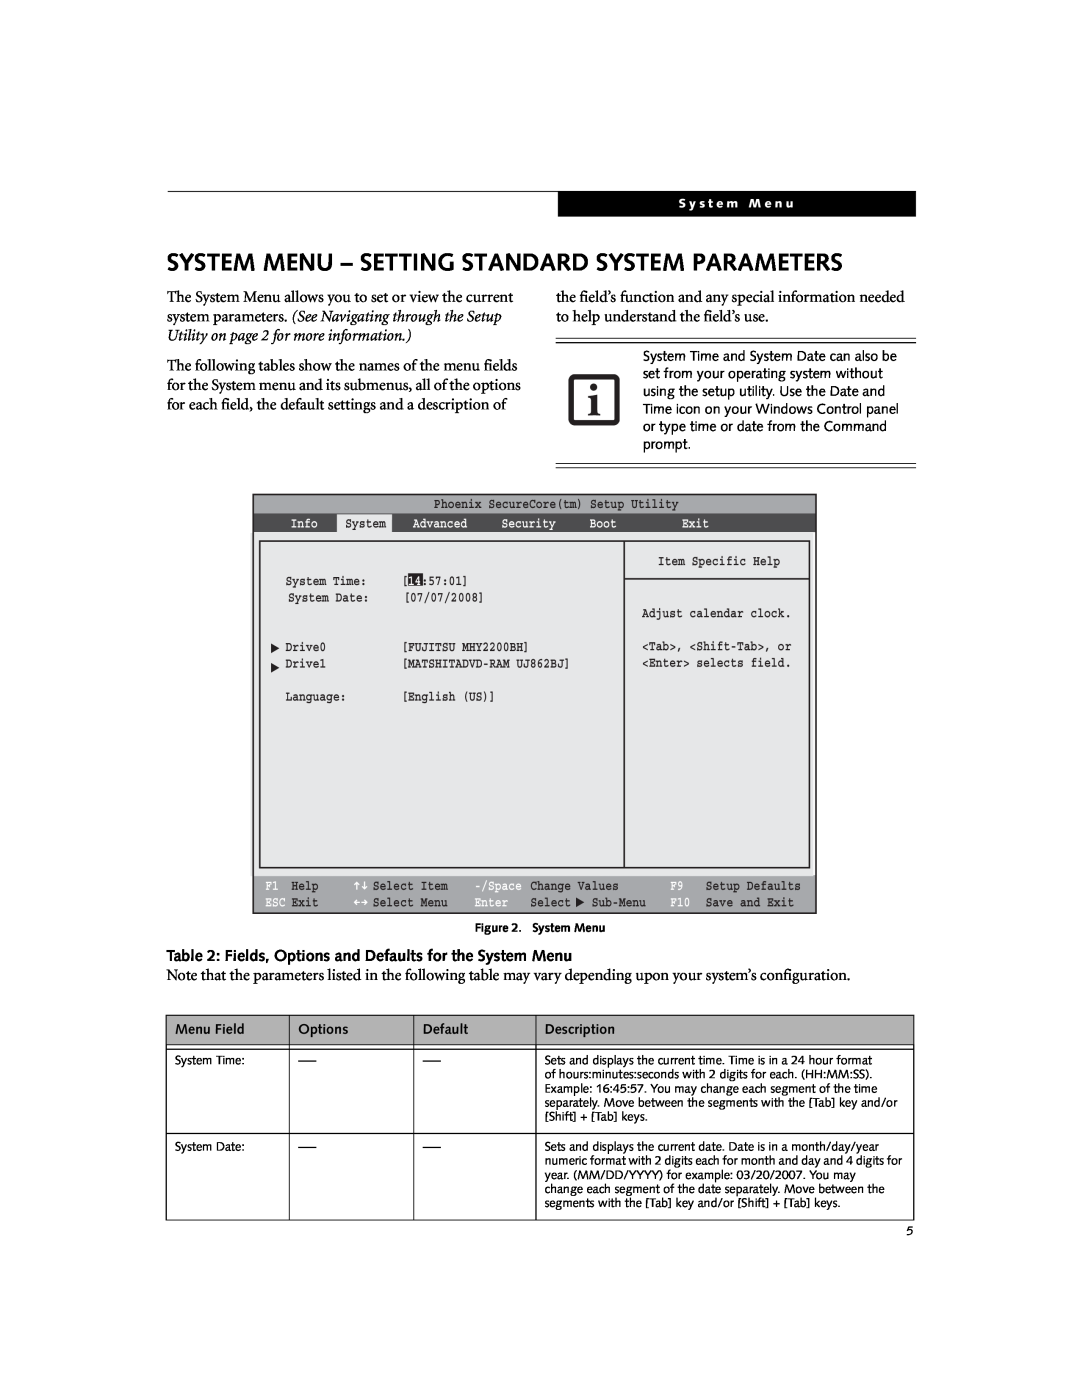 Fujitsu S6520 manual System Menu - Setting Standard System Parameters, Fields, Options and Defaults for the System Menu 